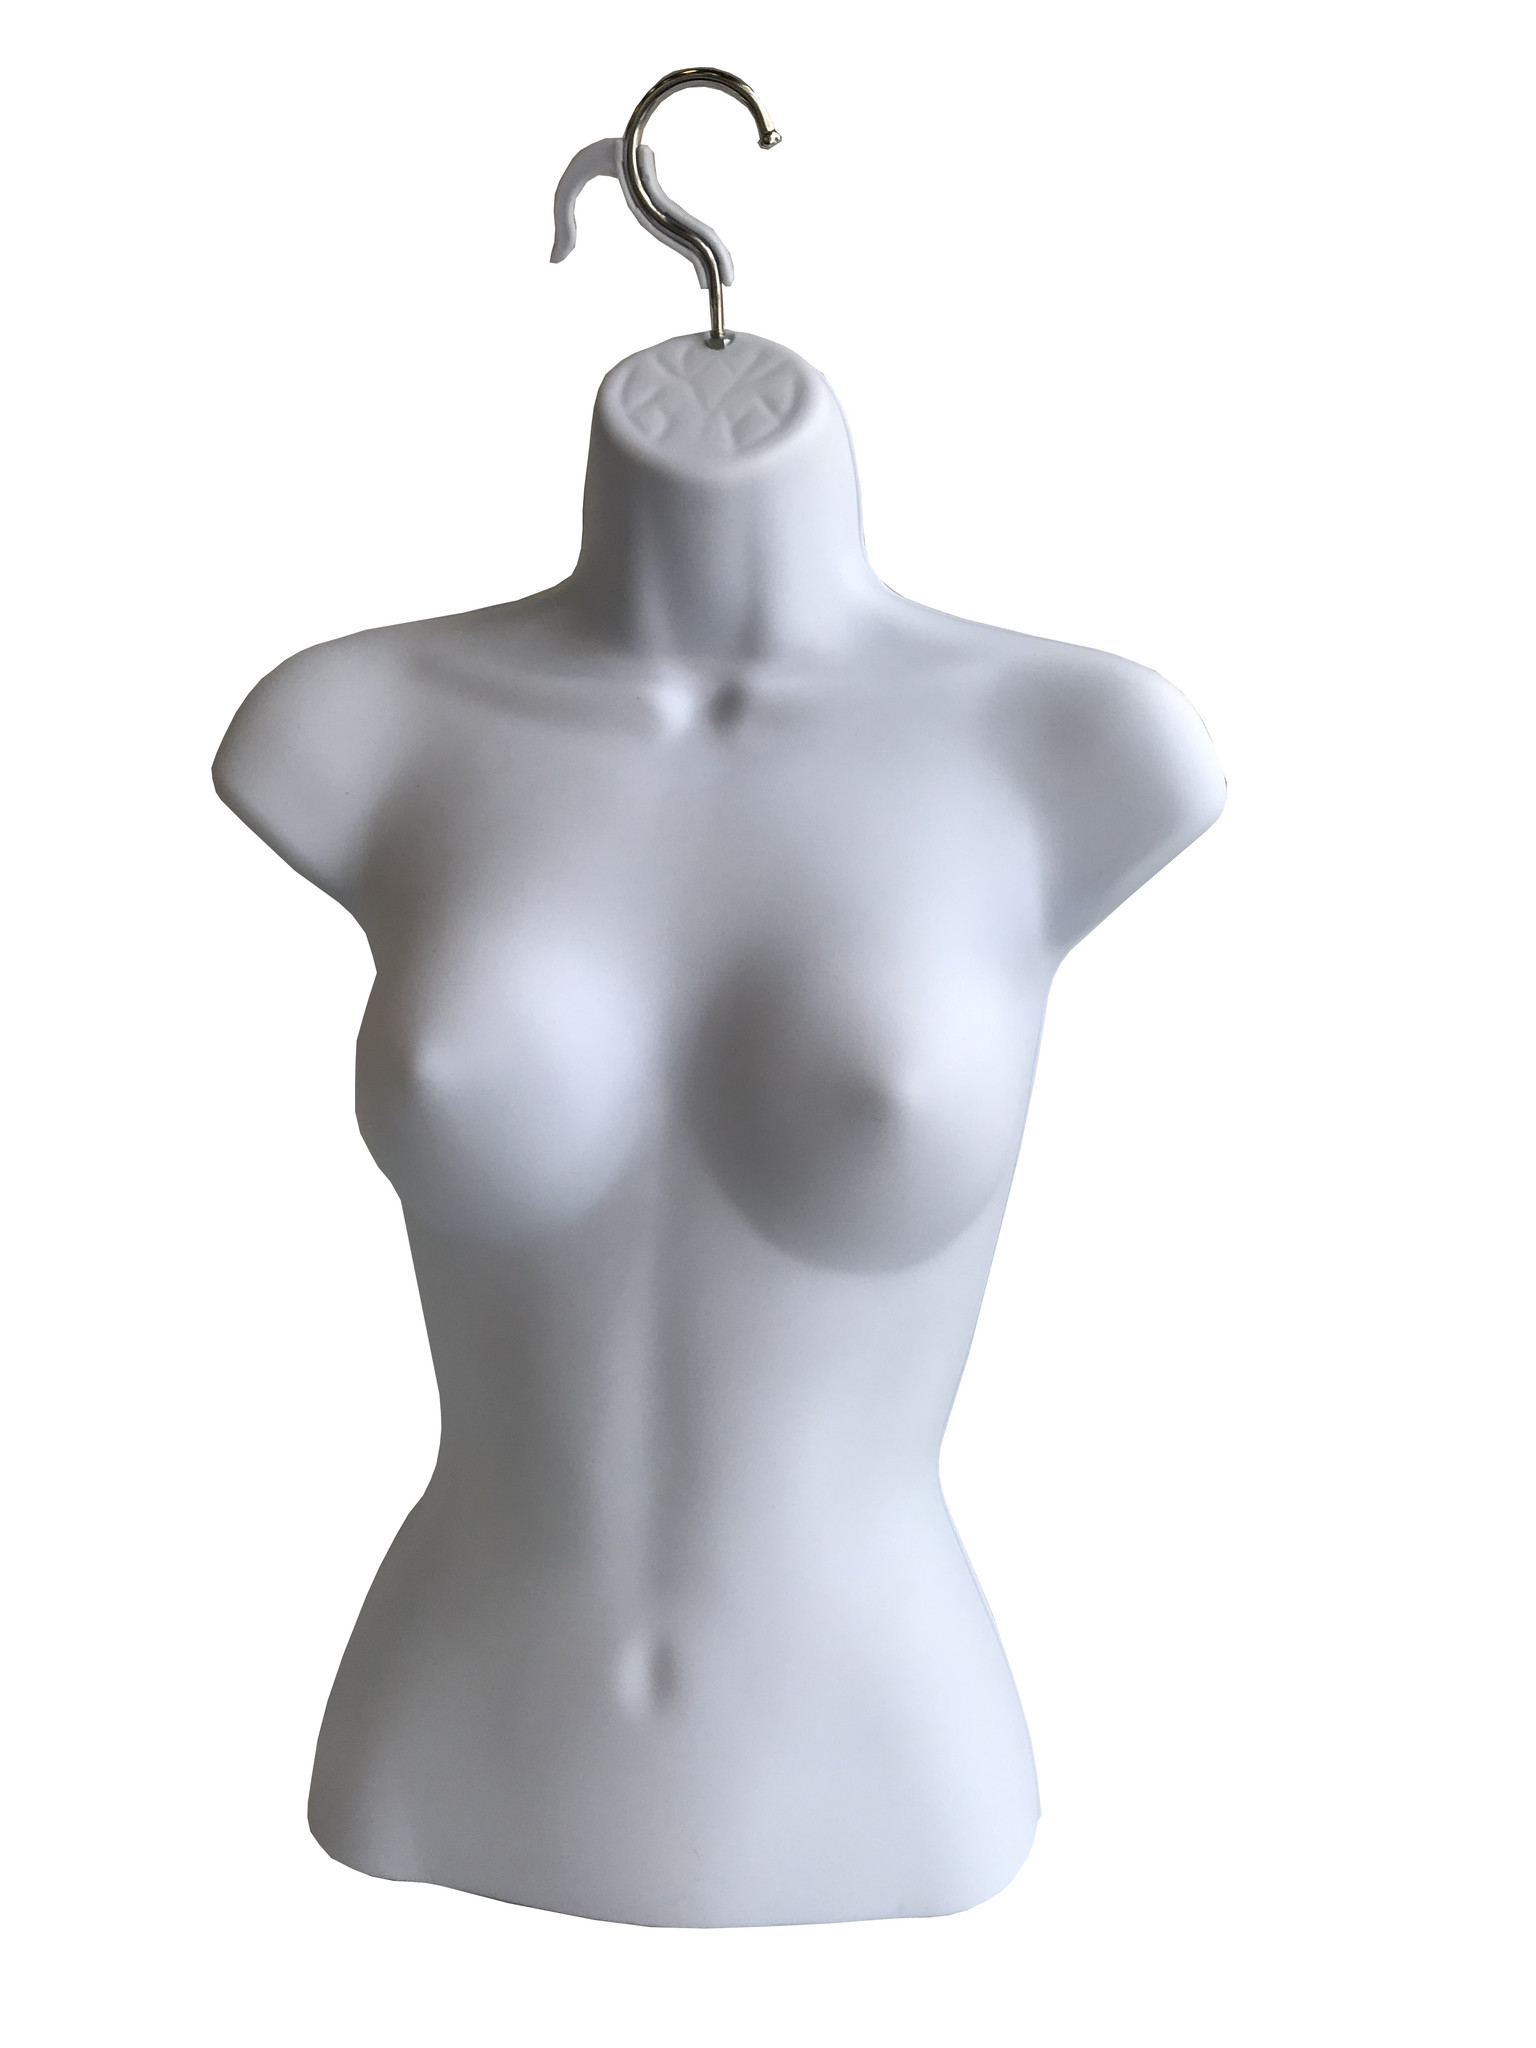 Female body bust form 3209 - Mobico